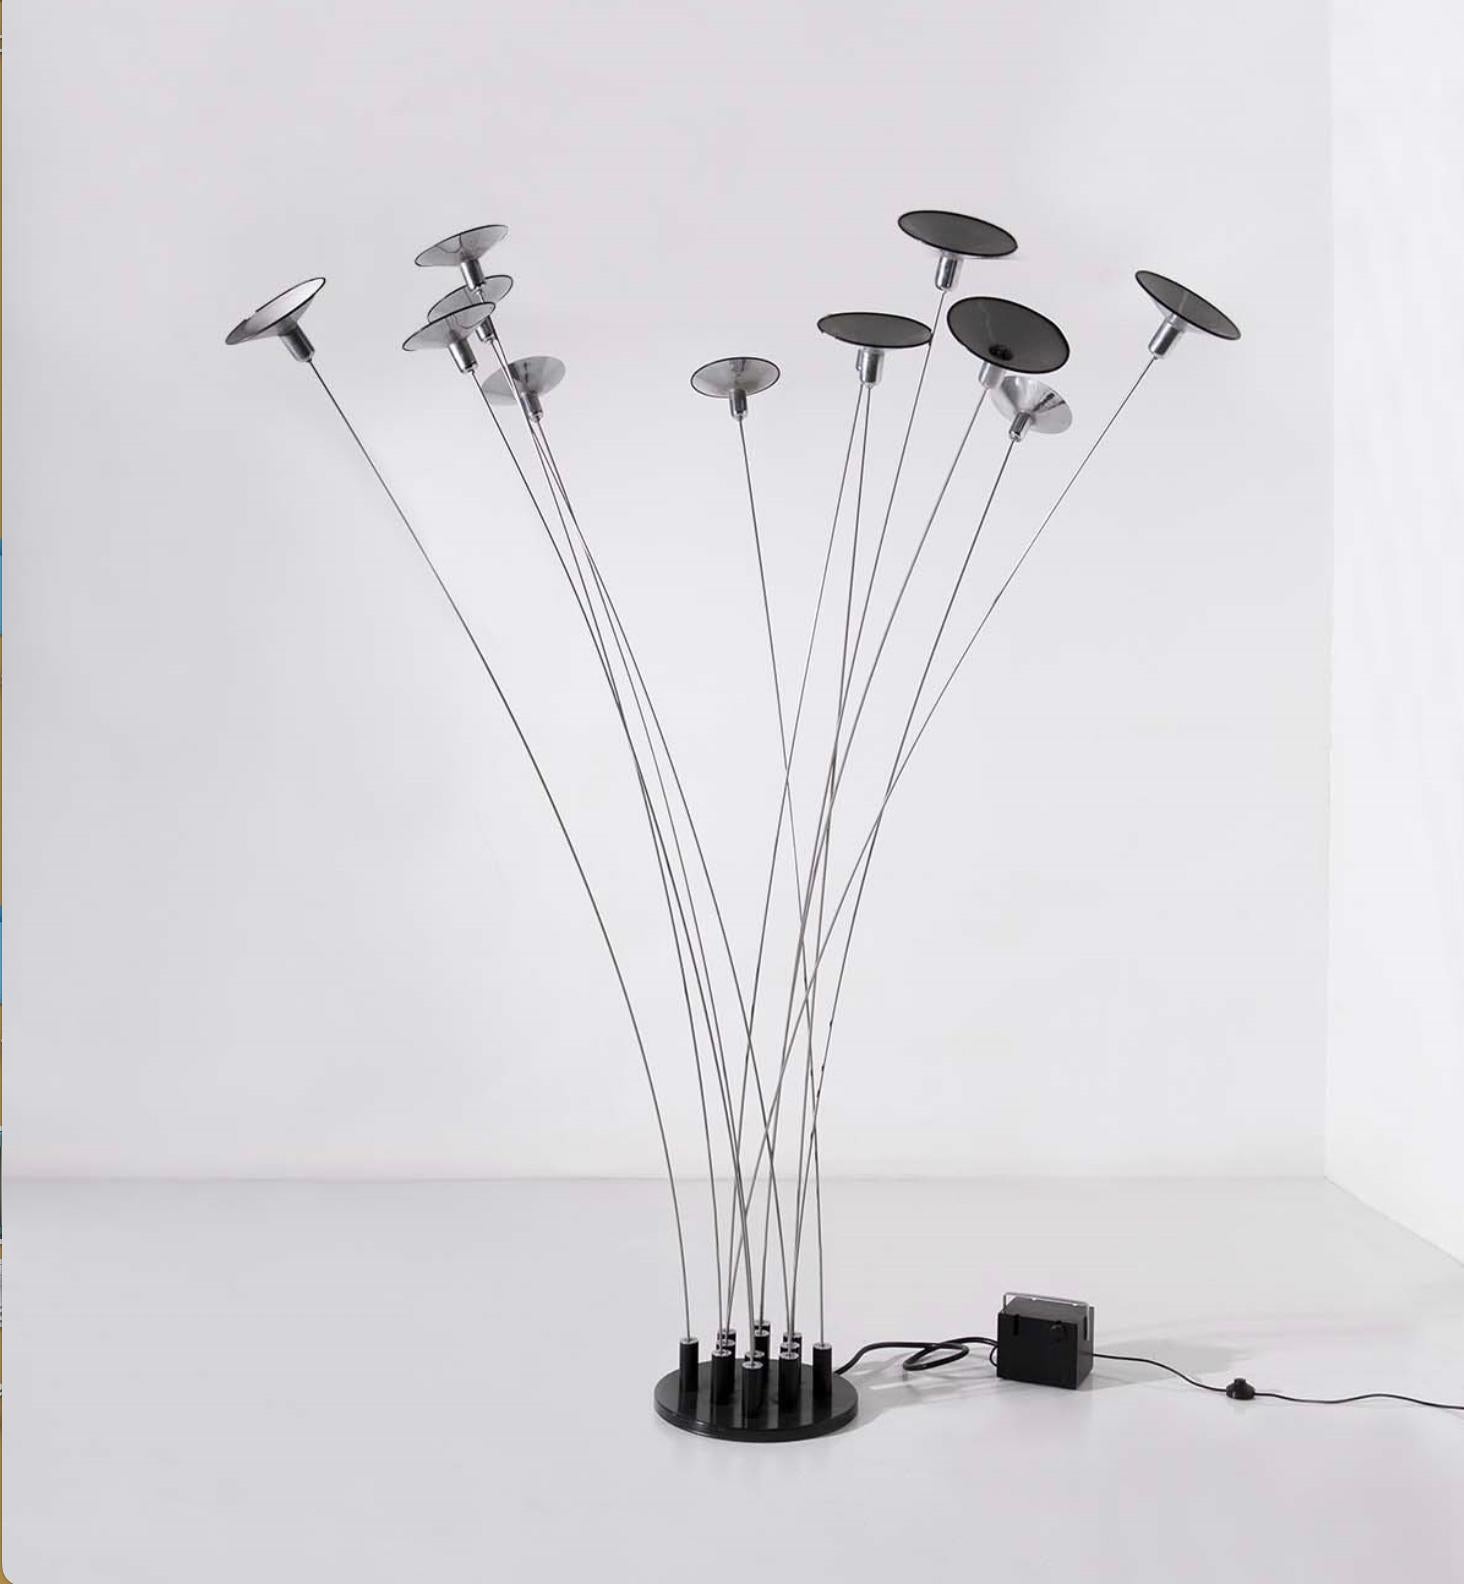 The monumental and rare Selenova Floor Lamp resembles a bouquet of tall flowers, and represents one of Sergio Moscheni's creative peaks in his production for the Italian company Selenova.

An ironic but rigorous work, scenographic but full of